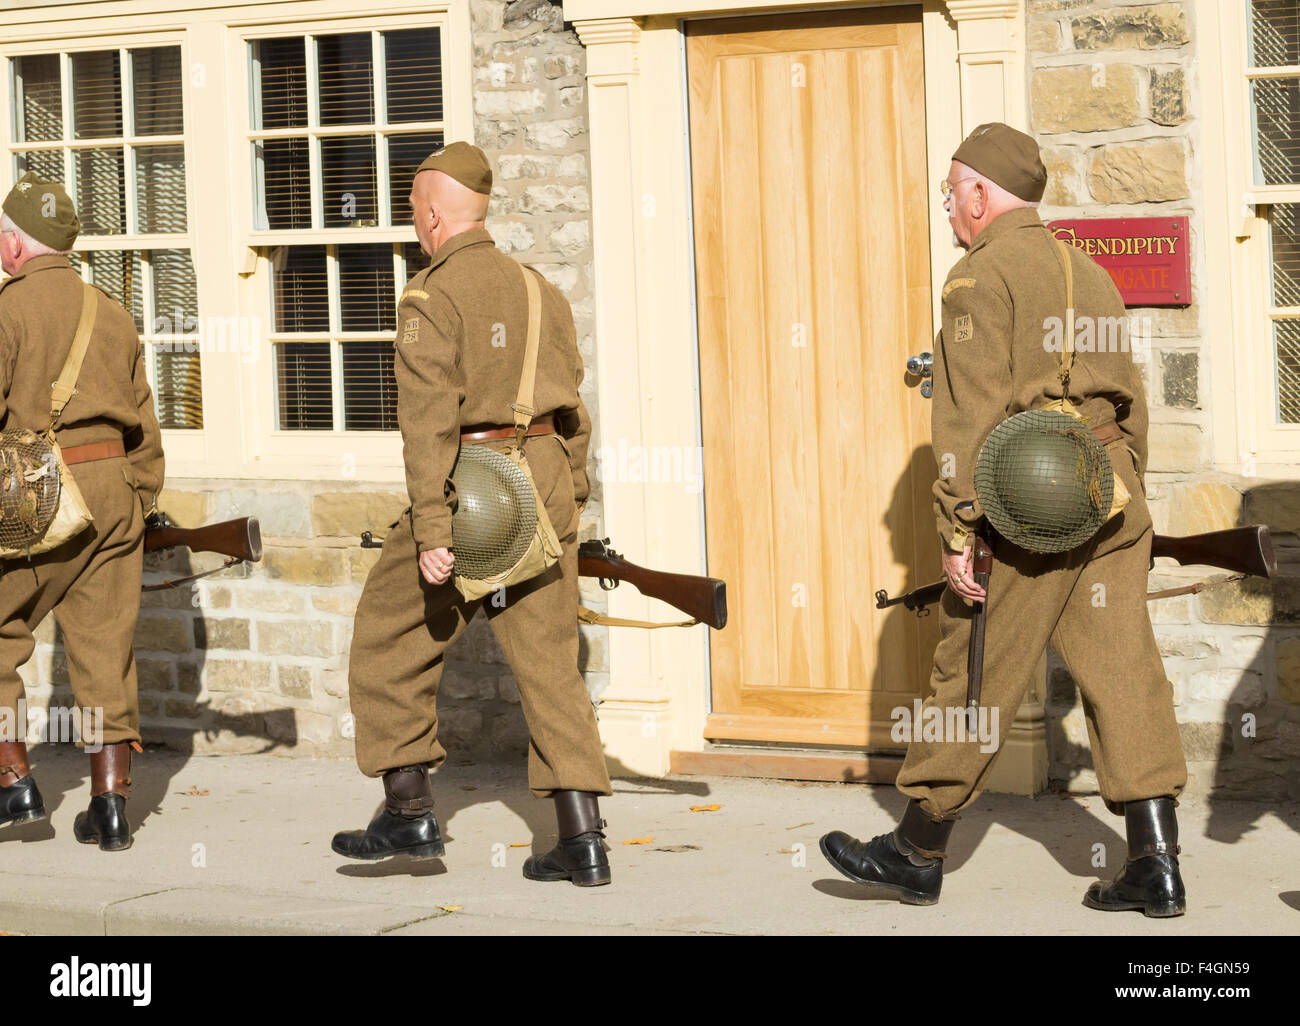 Pickering, North Yorkshire, UK. 17th October, 2015. Pickering`s annual Wartime and 40`s Weekend attracts thousands, with World War 2 living history camps and battle re-enactments amomg the attractions. PICTURED: Home Guard marching through the town Stock Photo